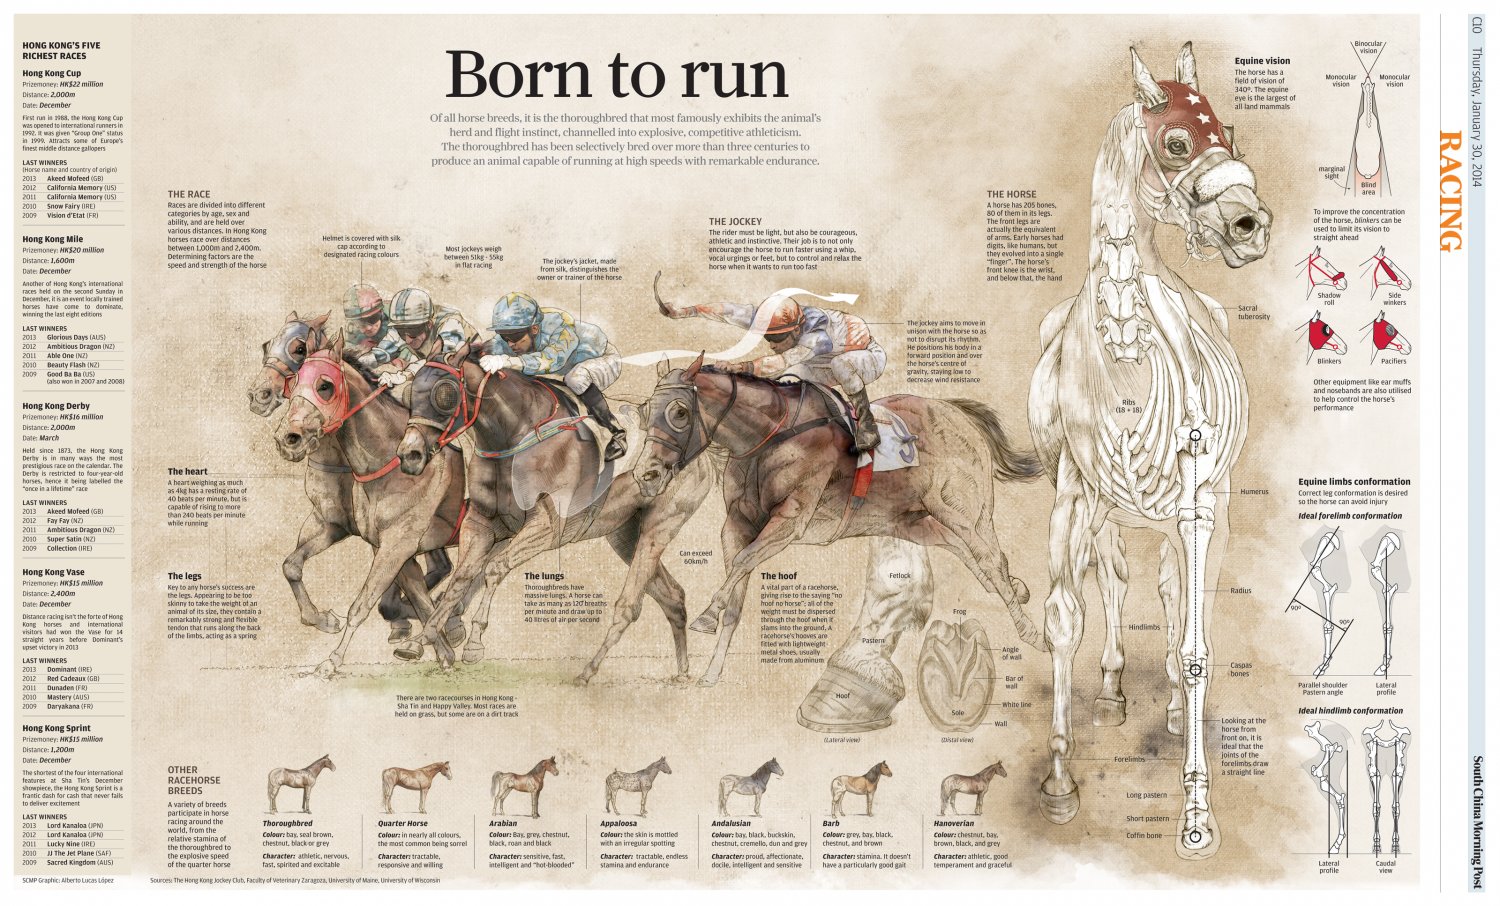 Hong Kong's Five Richest Races Born to Run Chart 13"x19" (32cm/49cm) Polyester Fabric Poster